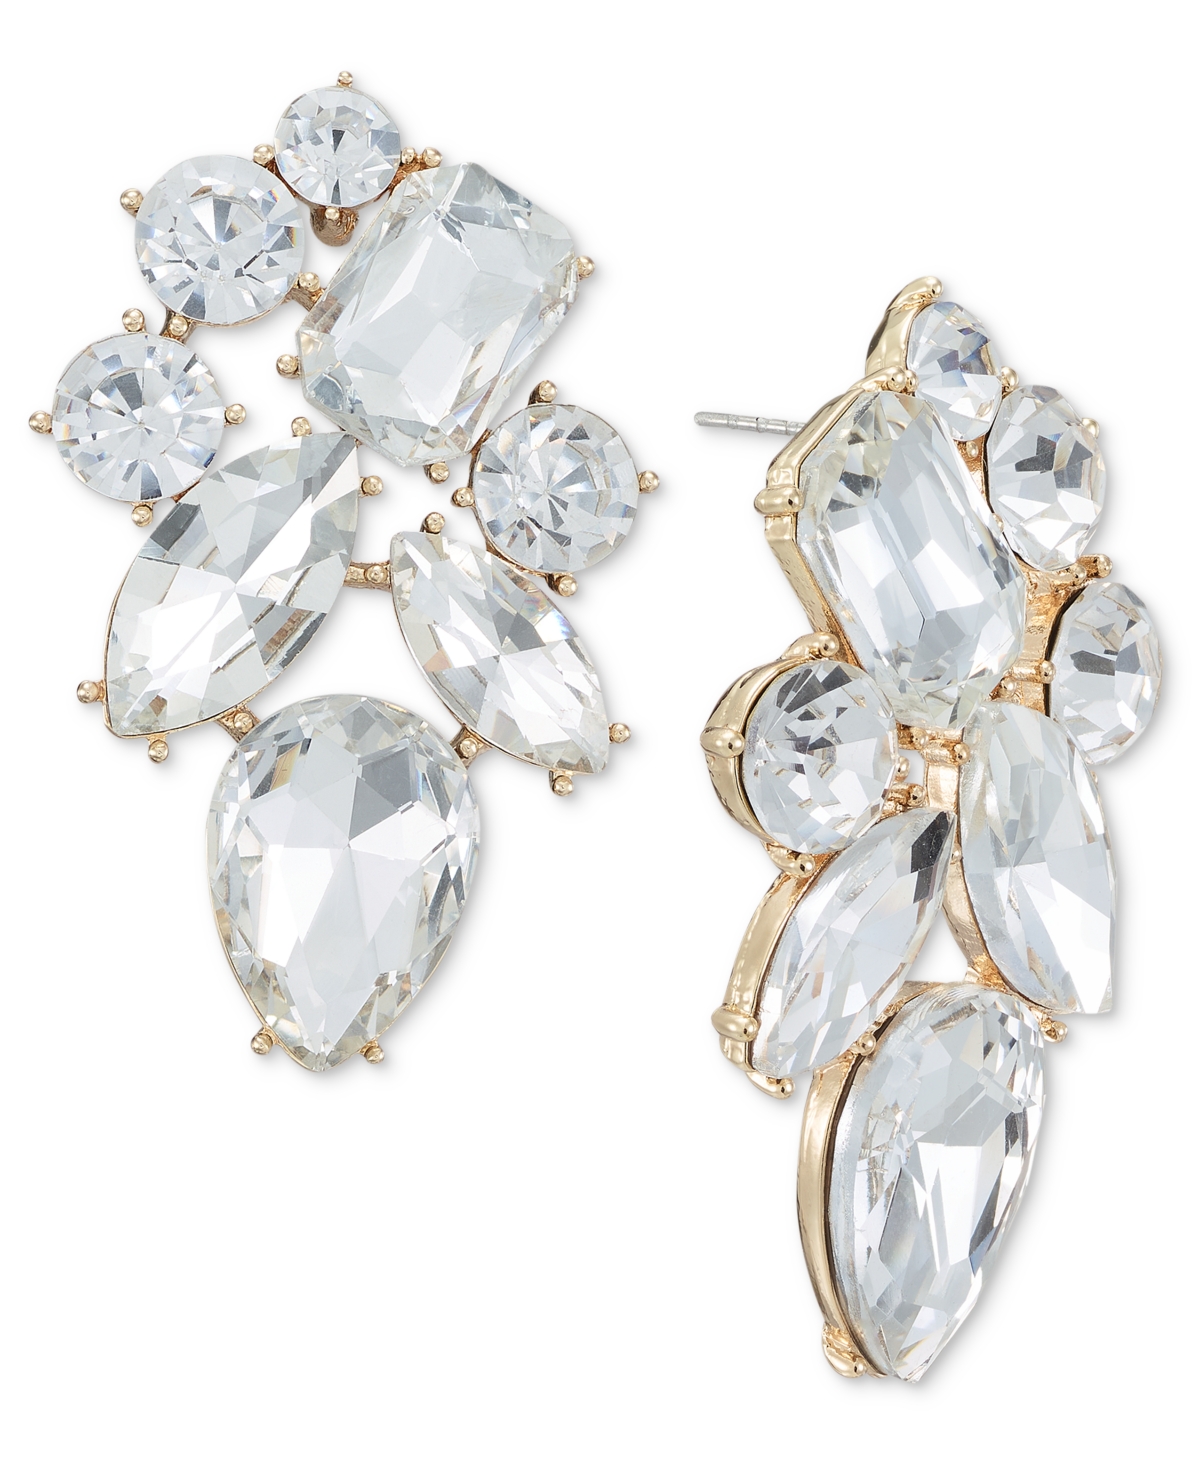 Gold-Tone Crystal Cluster Drop Earrings, Created for Macy's - Gold